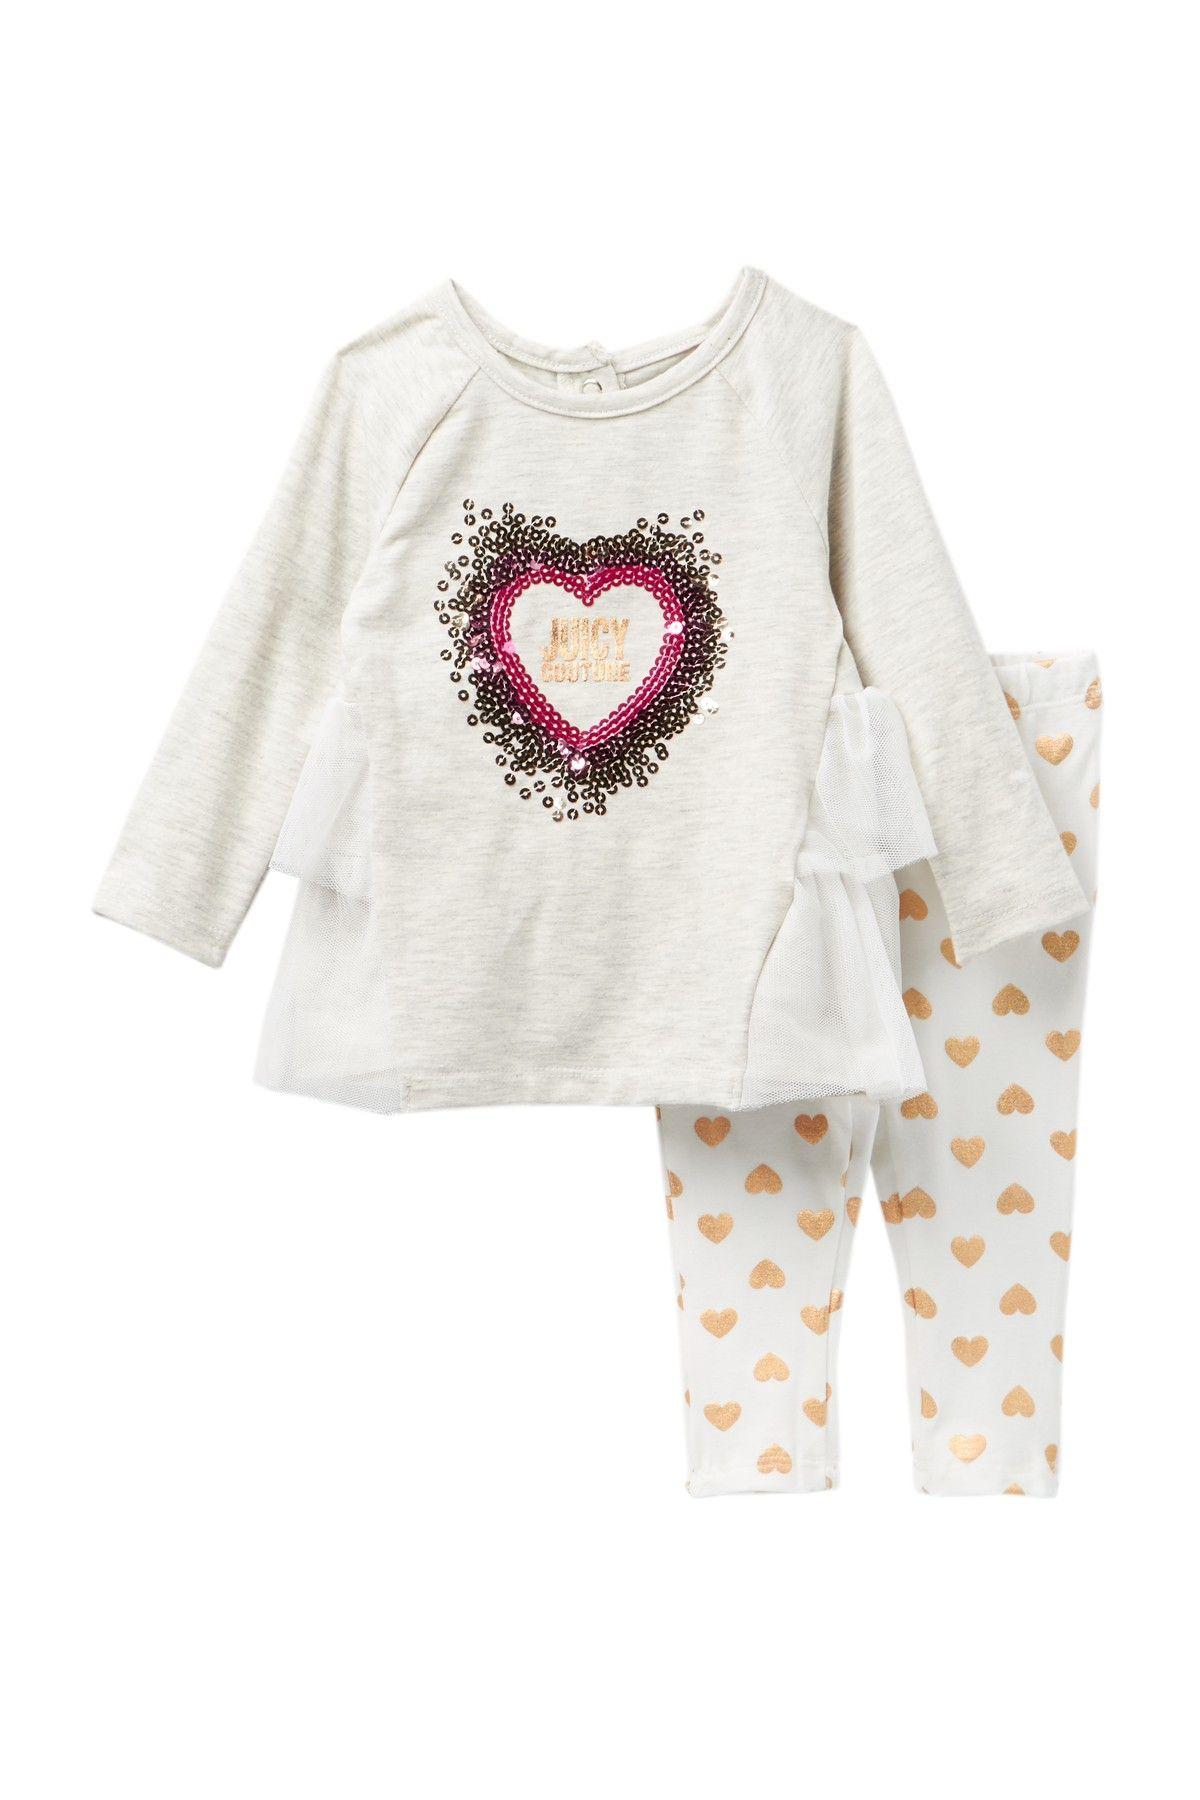 Juicy Couture Hearts Logo - Juicy Couture | Sequin Heart Tunic & Hearts Leggings Set (Baby Girls ...